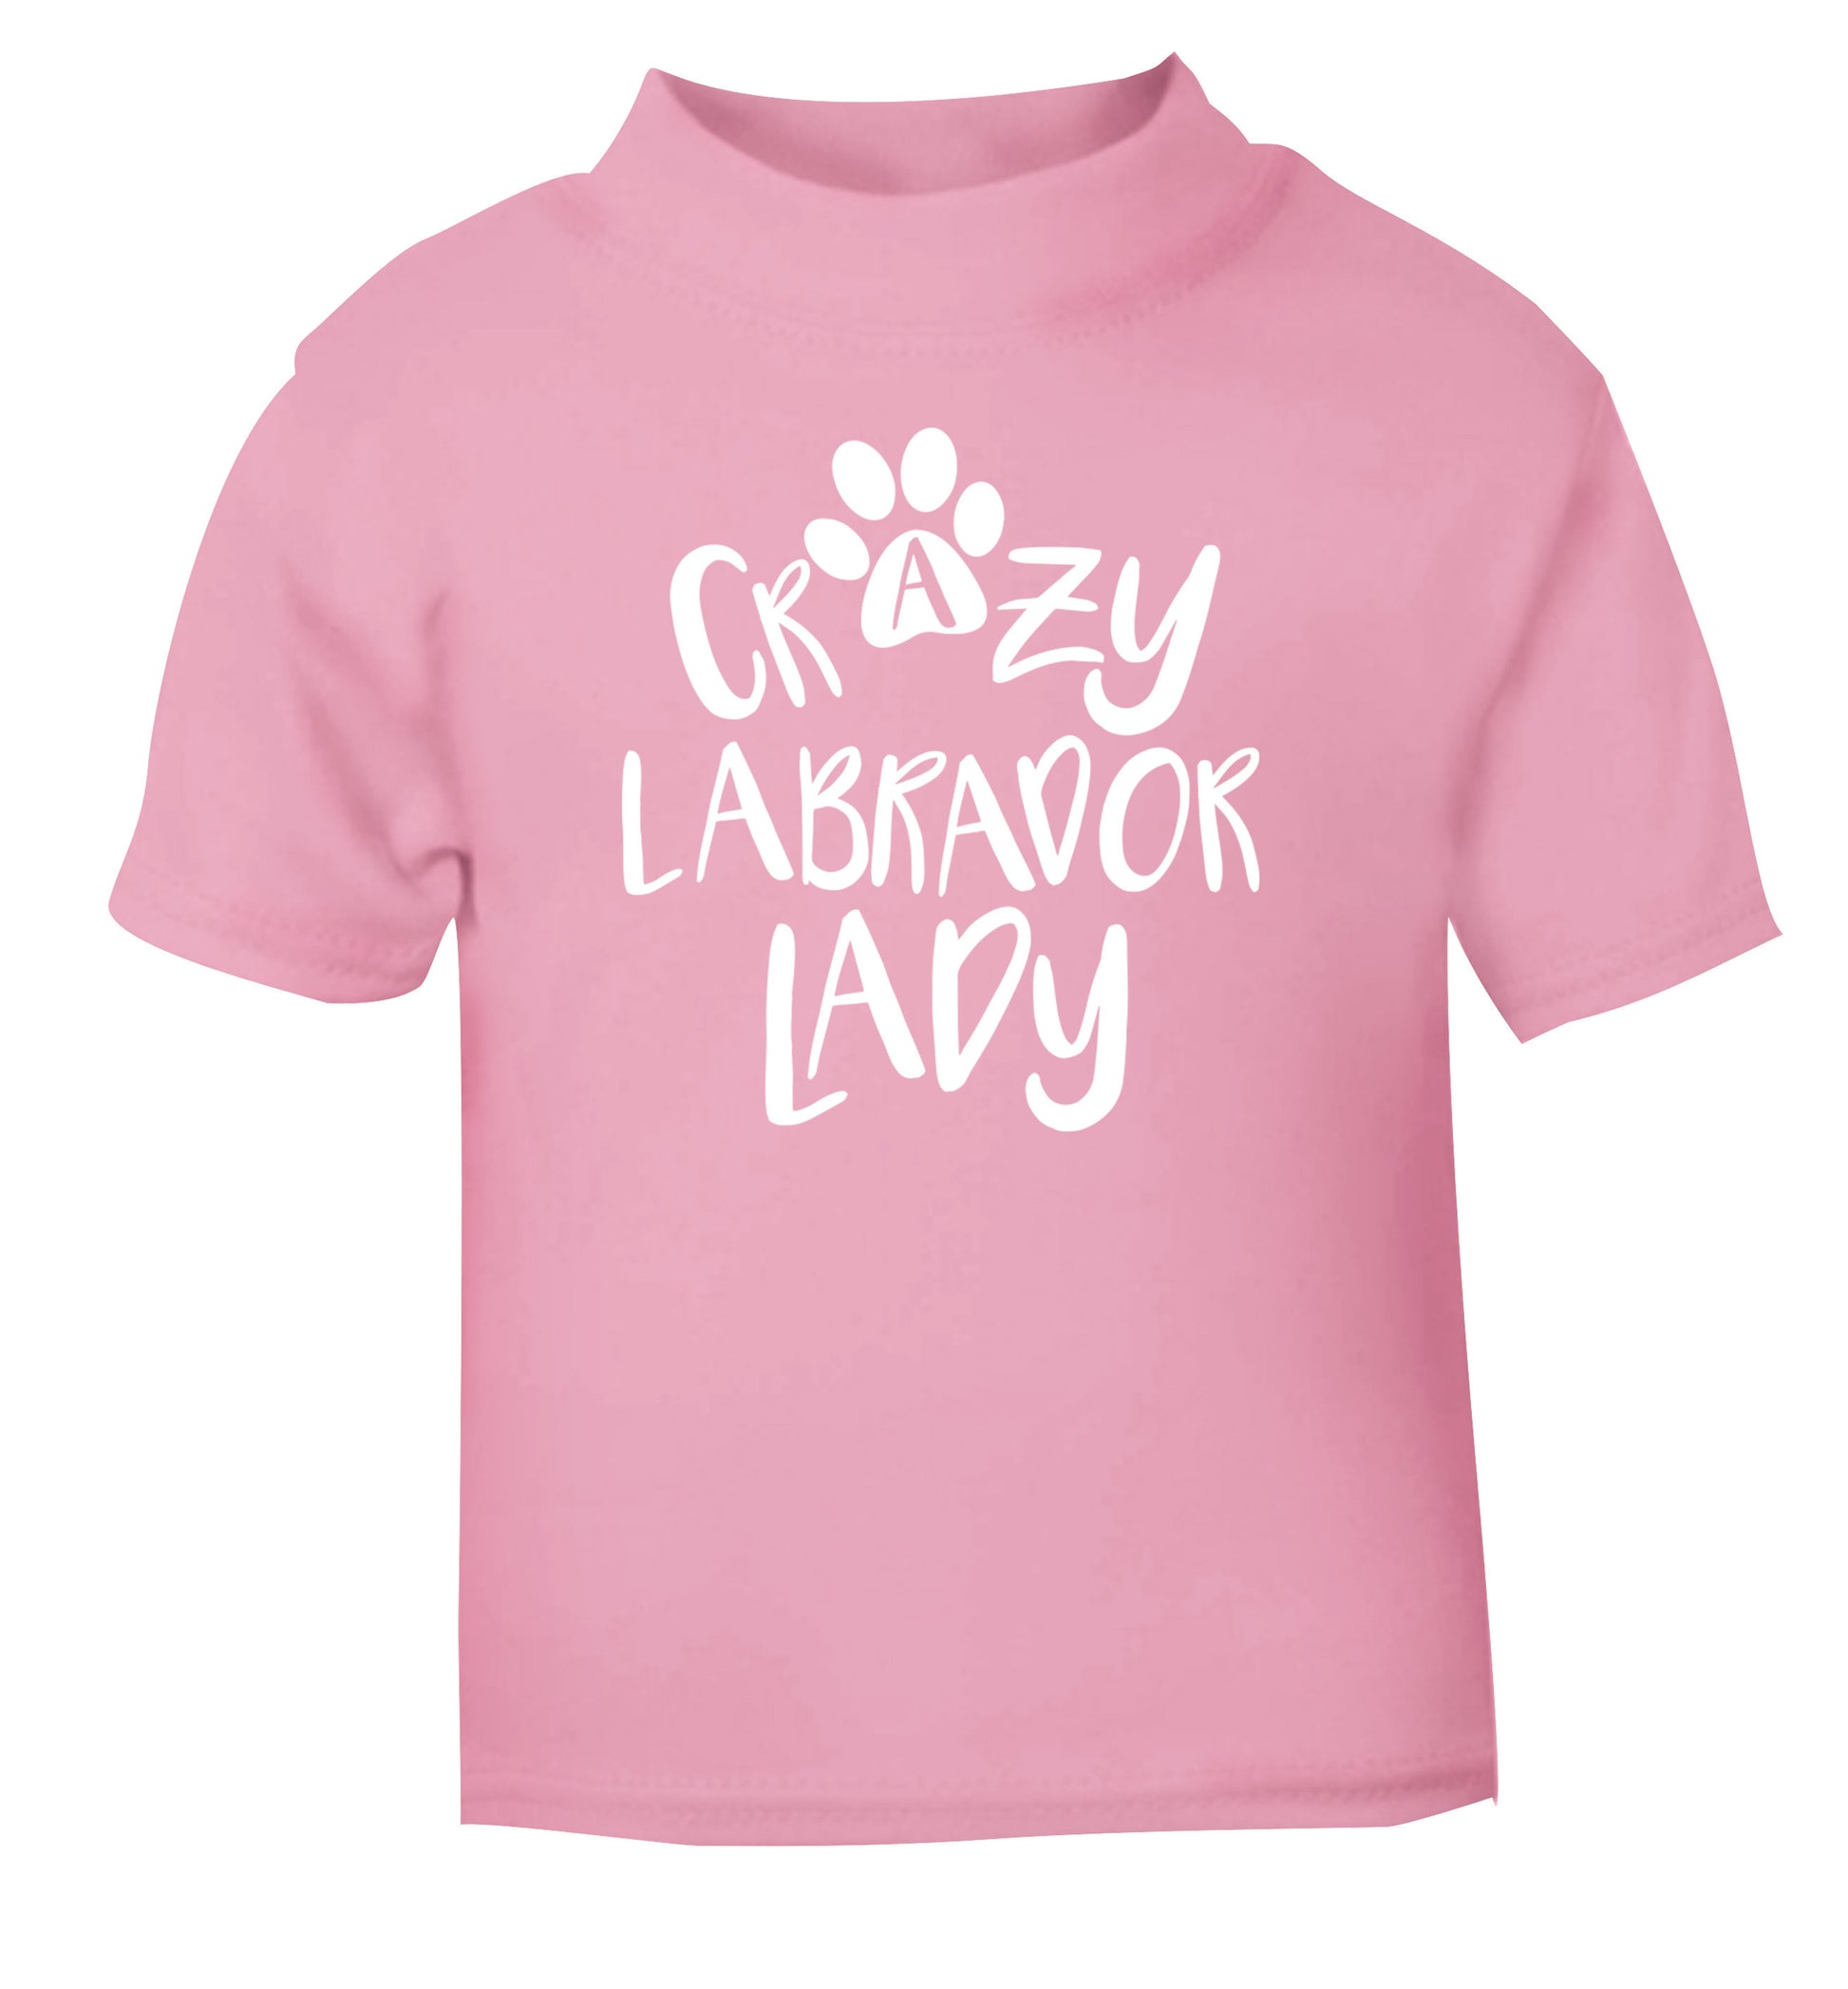 Crazy labrador lady light pink Baby Toddler Tshirt 2 Years